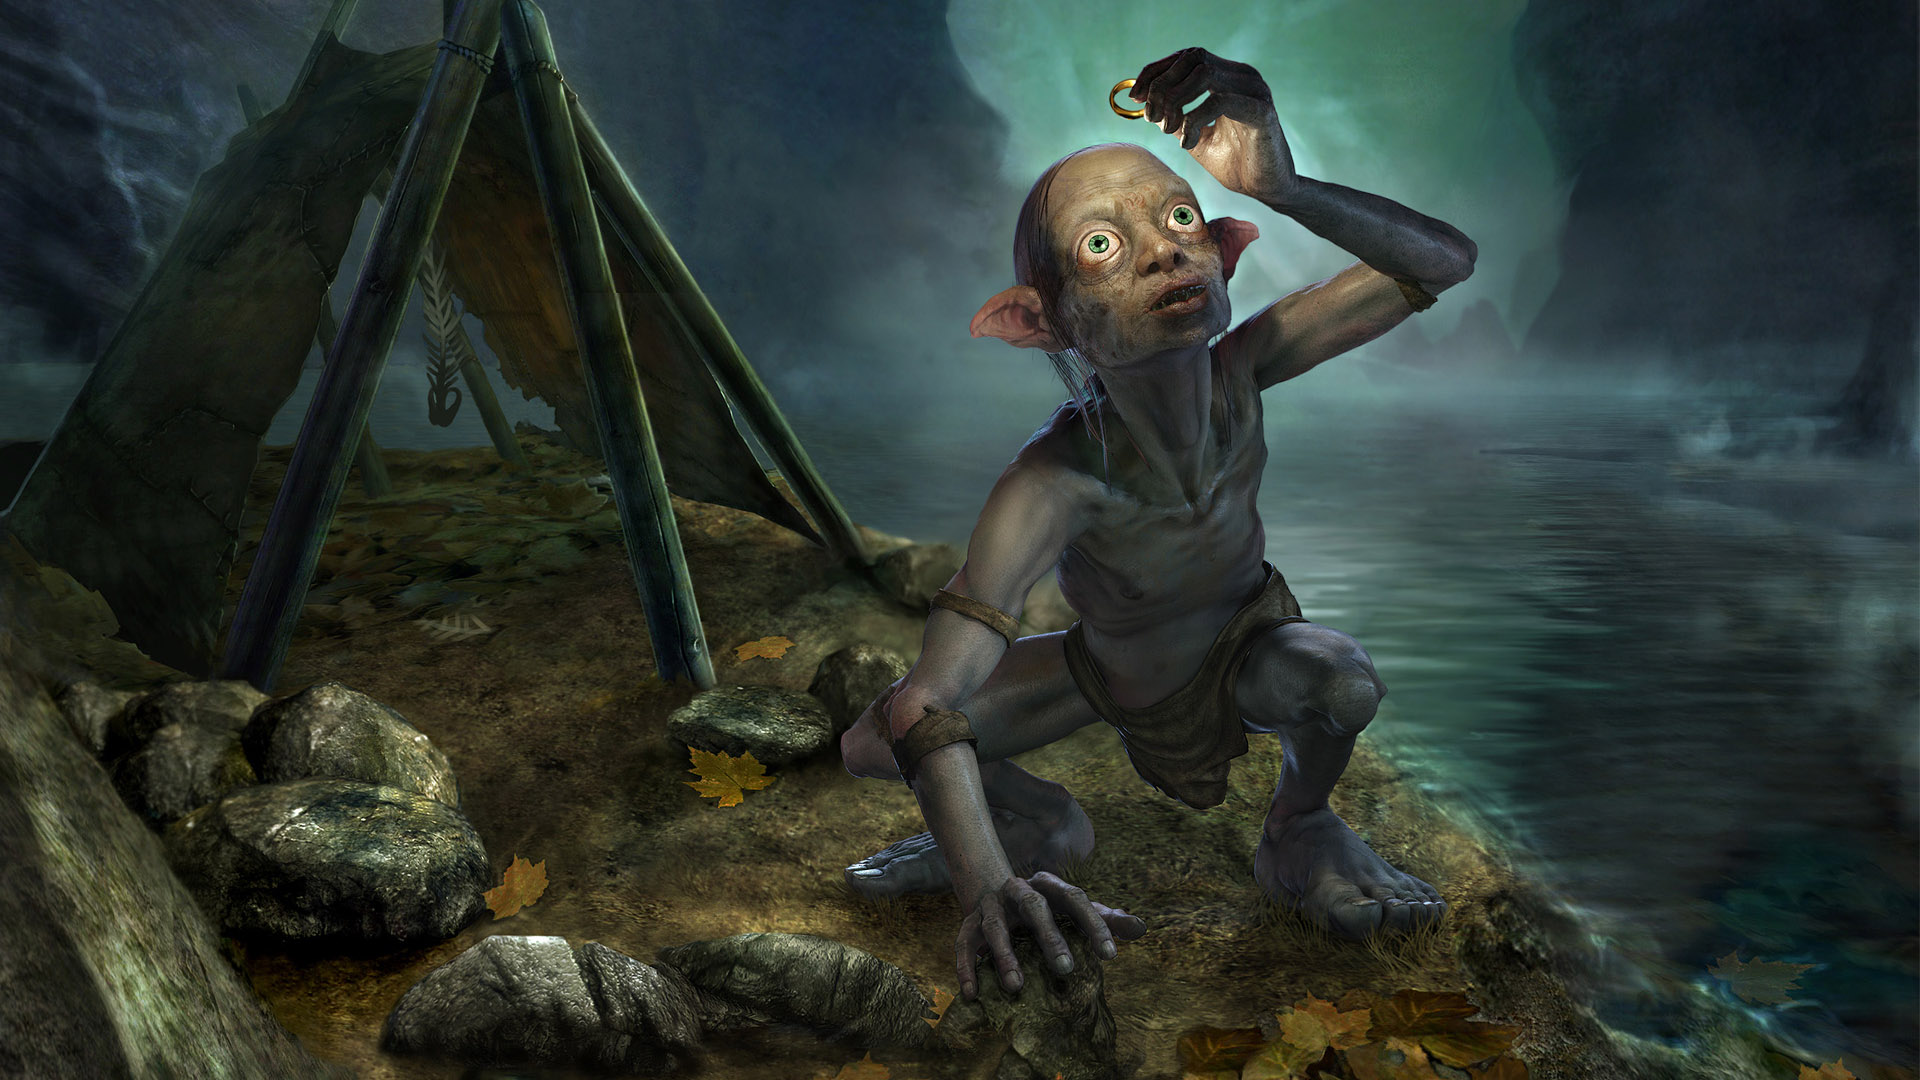 Fantasy Art Digital Gollum The Lord Of The Rings Creature The One Ring 1920x1080